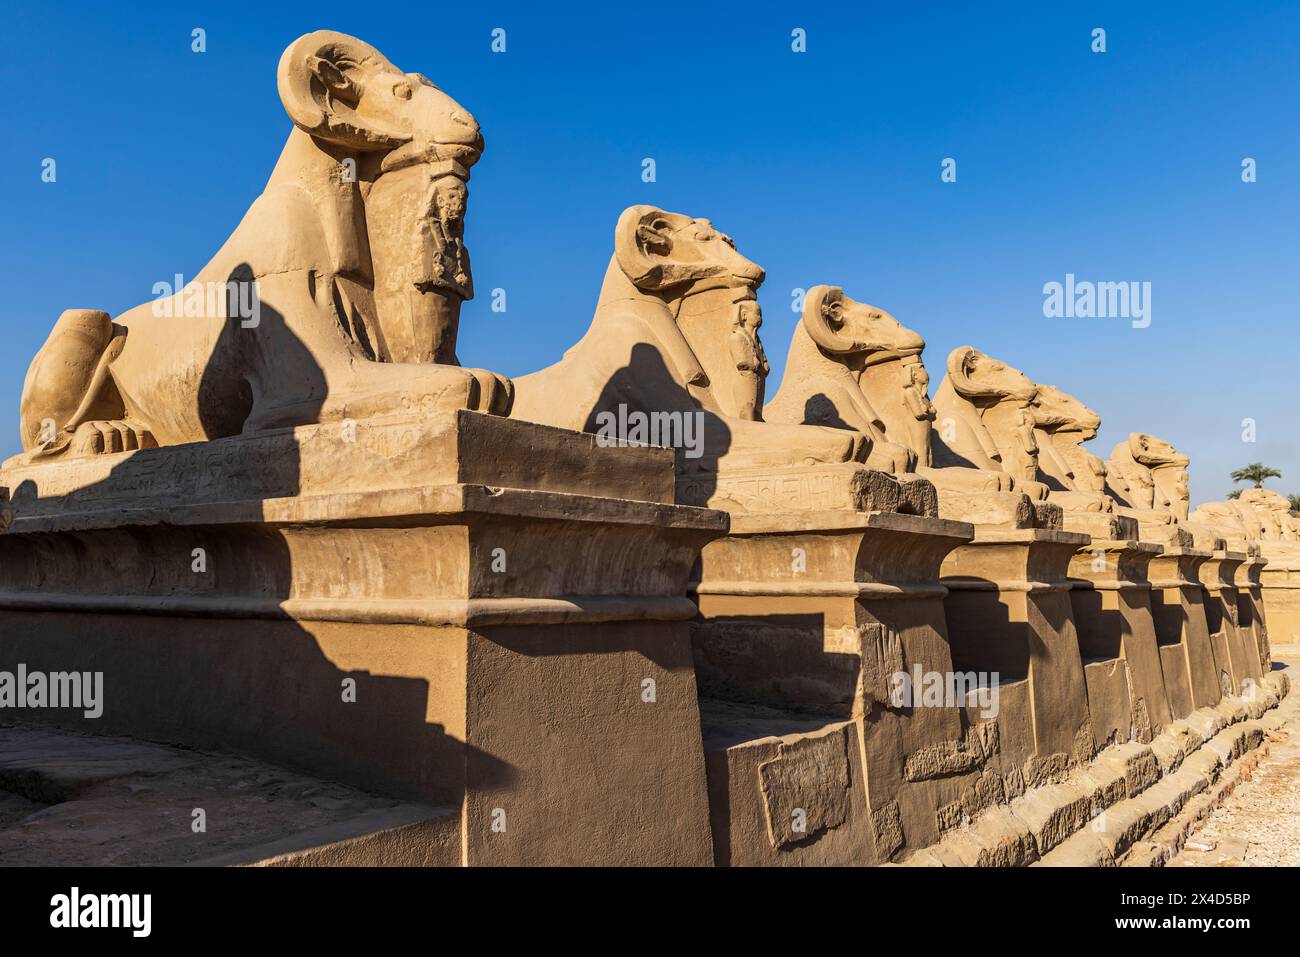 Karnak, Luxor, Egypt. Avenue of the Rams Headed Sphinxes at the Karnak Temple Complex. Stock Photo